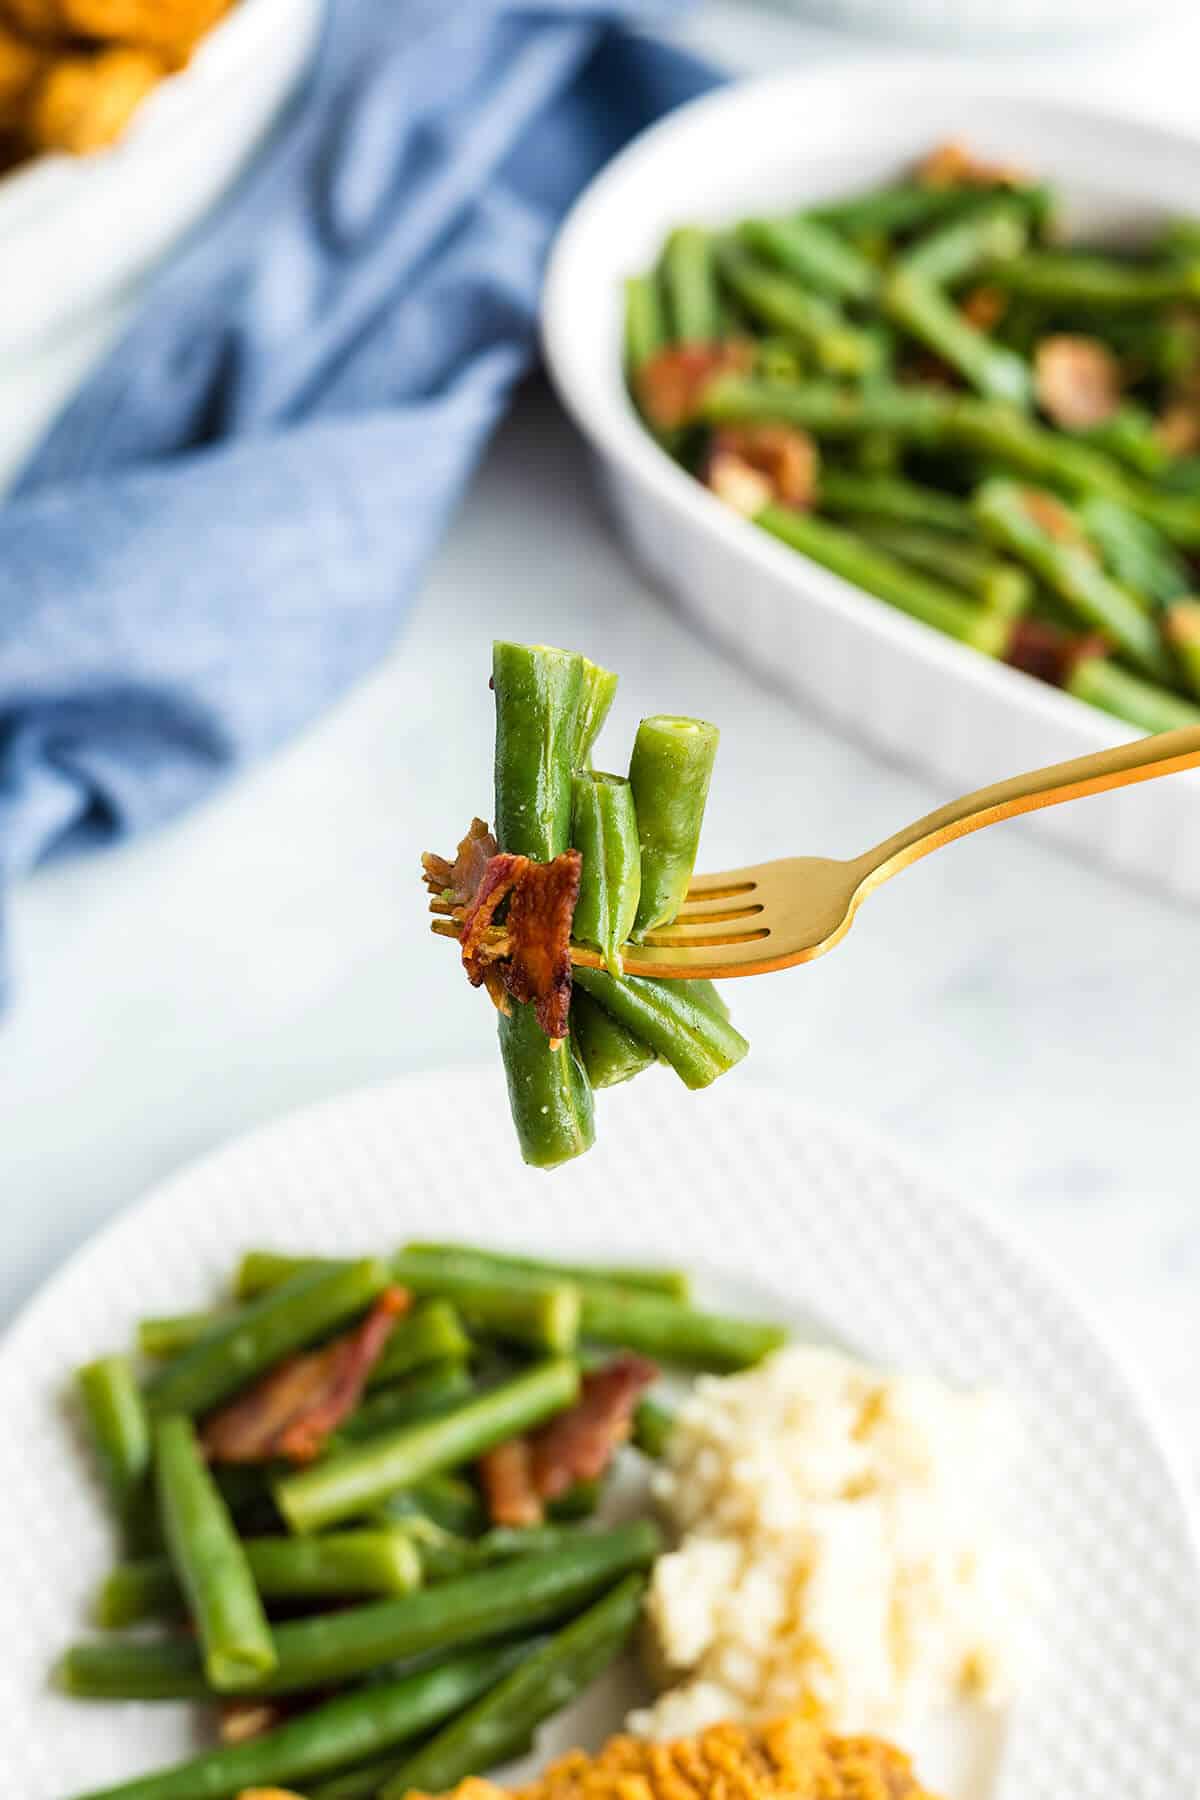 A fork holding green beans with pieces of bacon against a background of dishes with more green beans and other food.